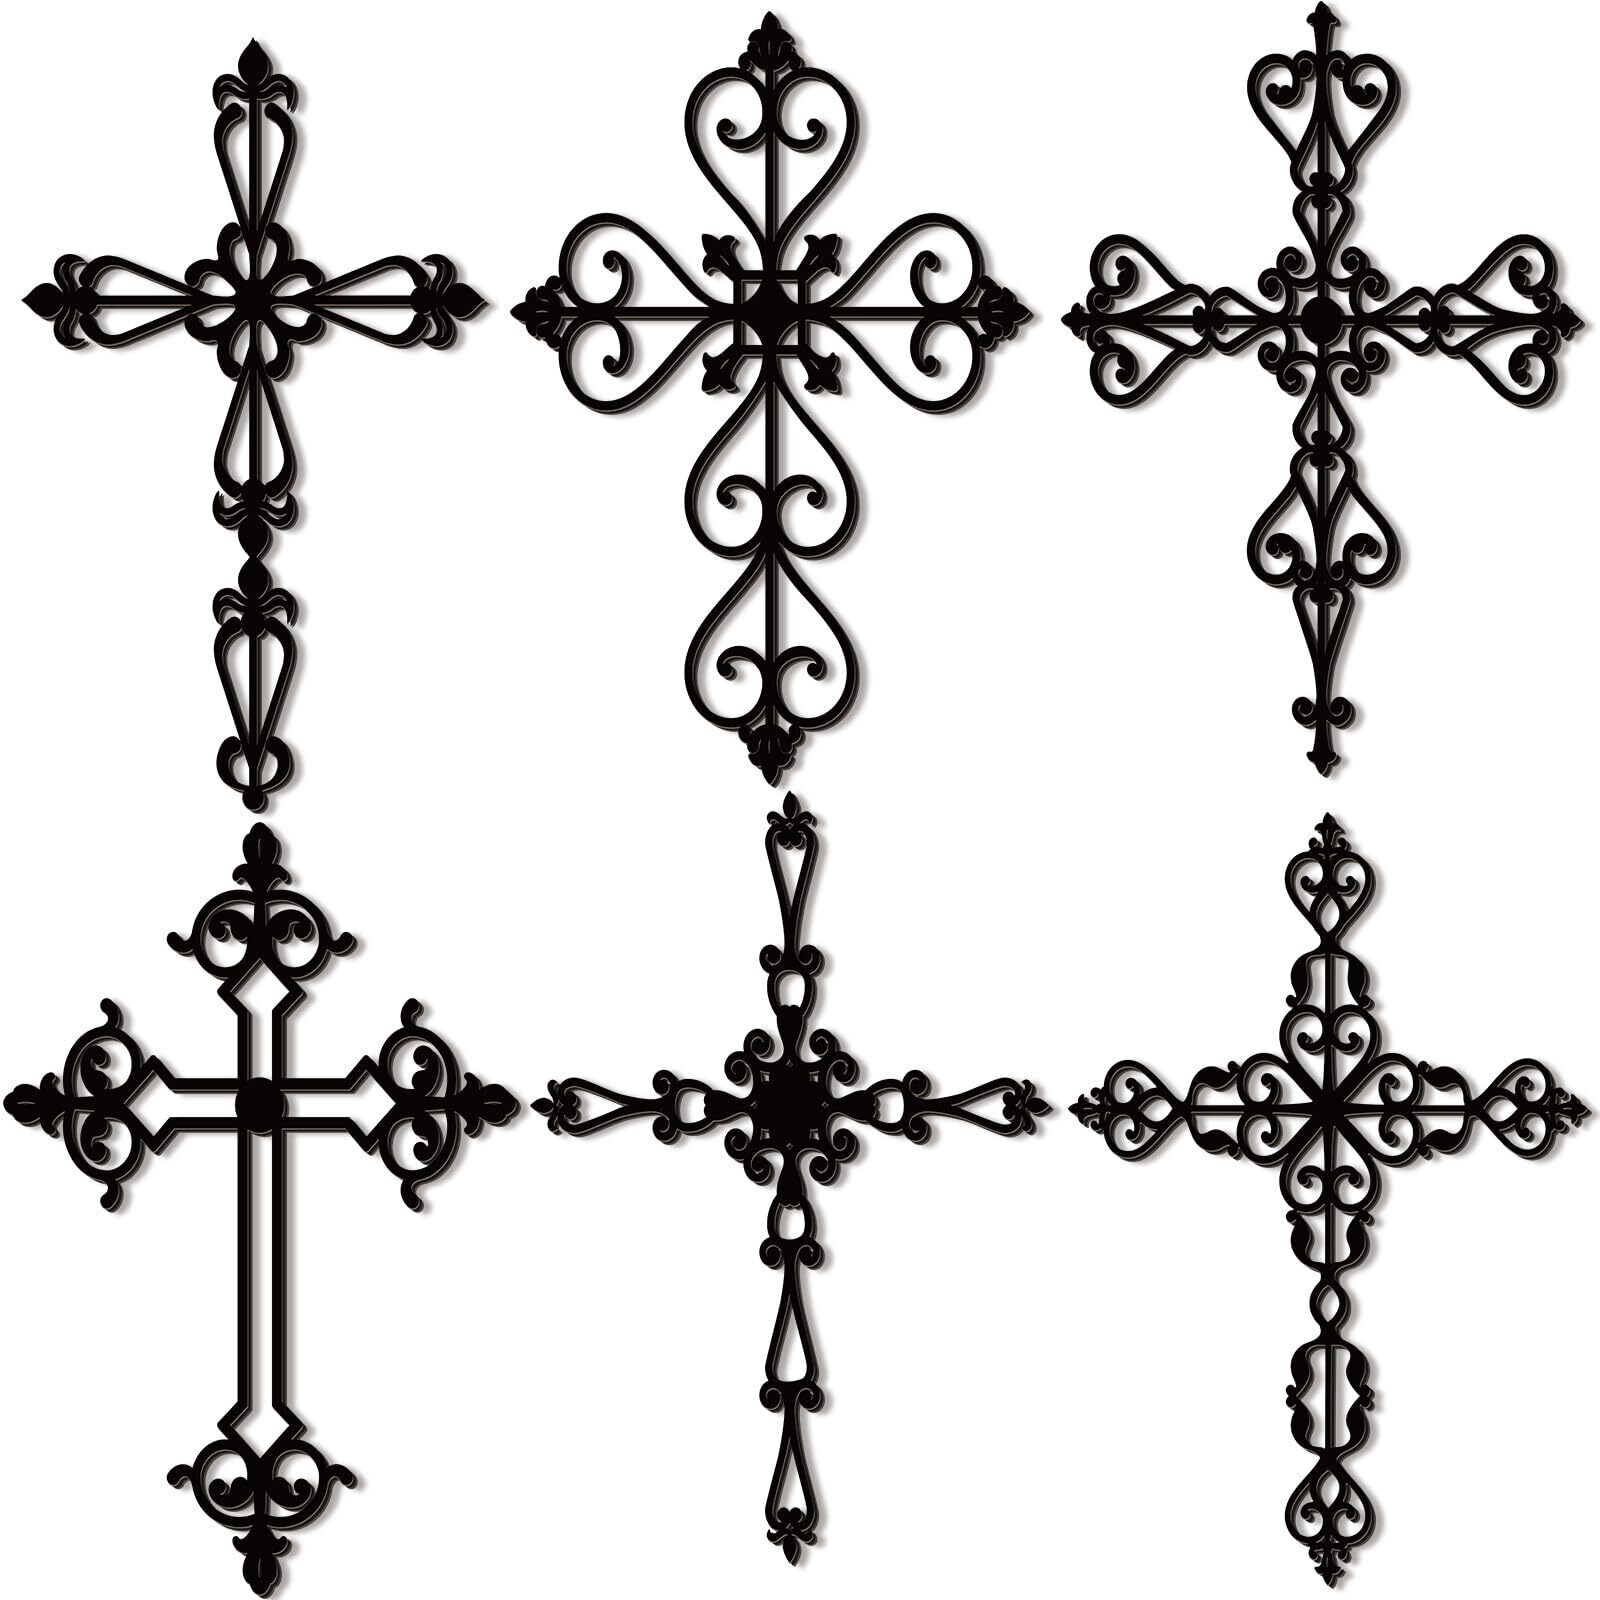 6 Pcs Wooden Wall Hanging Cross Religious Antique Cross Wall Decor Hand Carve